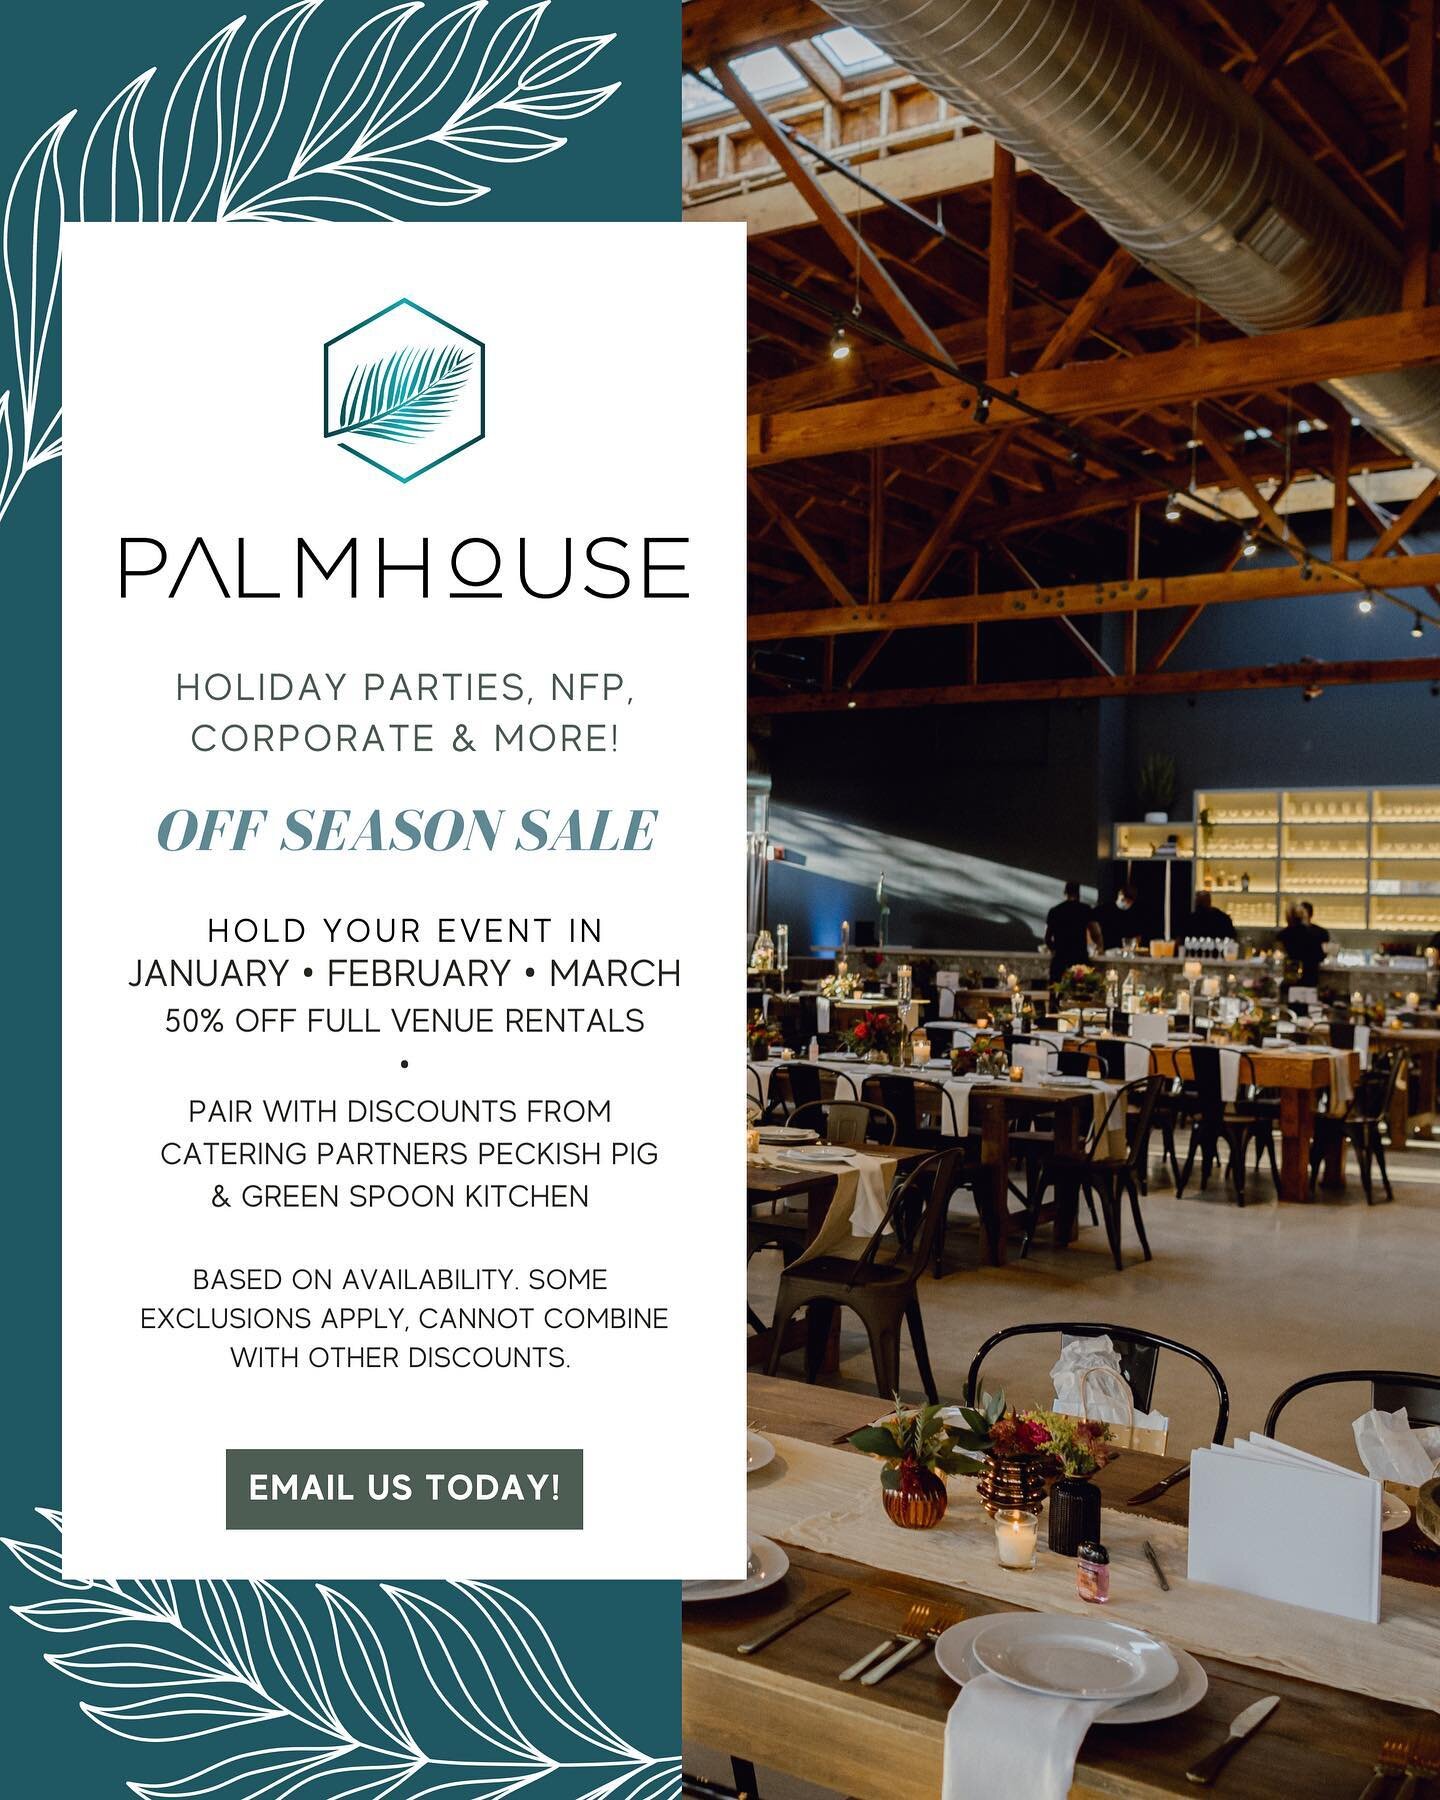 Tis&rsquo; the season for sales and we are no exception! We&rsquo;re giving back with our &lsquo;Off Season Sale&rsquo; - Book now for dates in January, February &amp; March for 50% off full venue rental rates! Not only that, partner it with discount